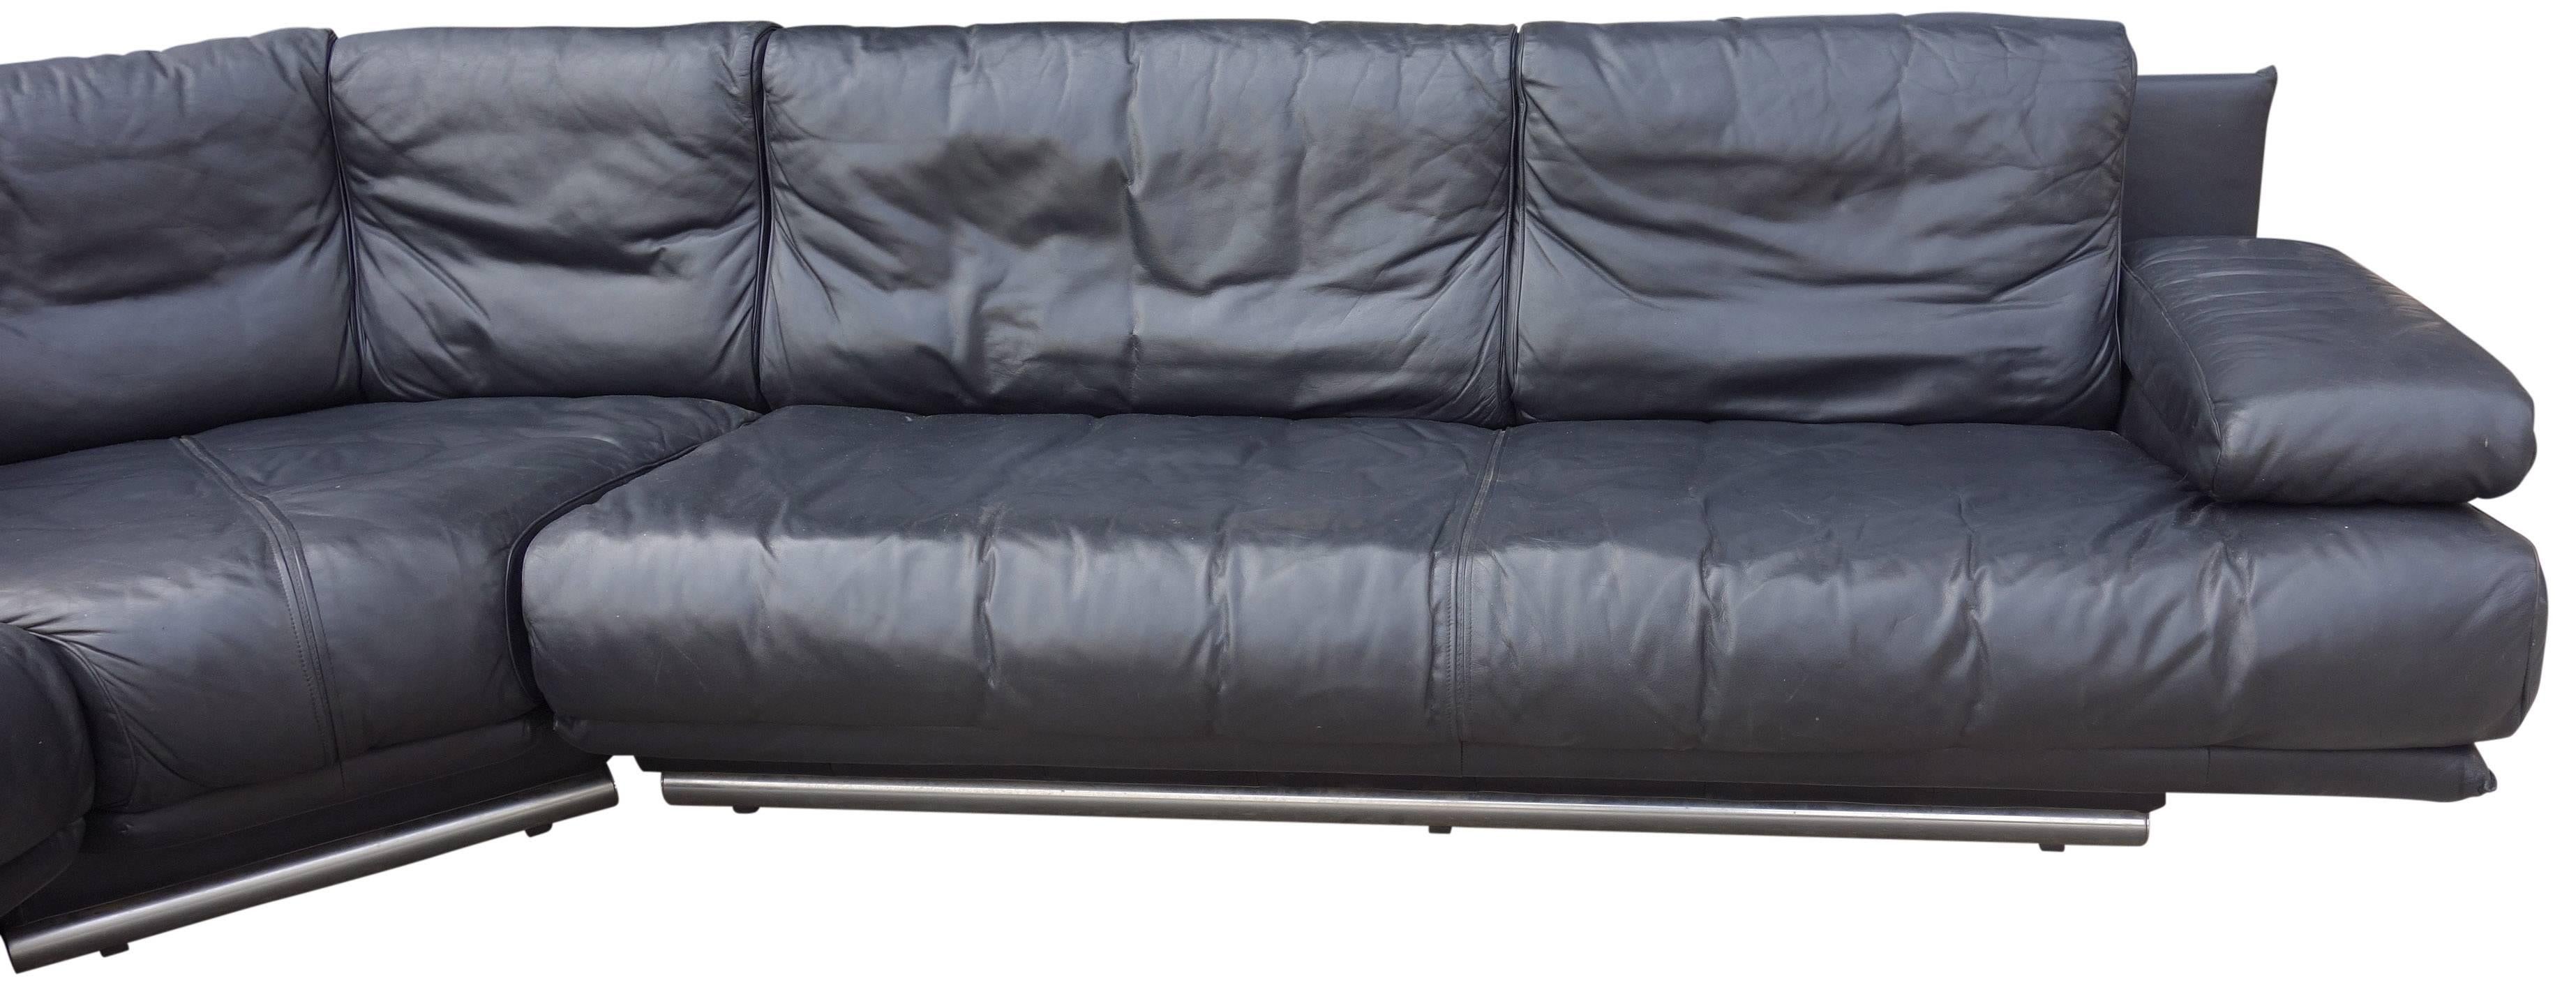 Midcentury Leather Sectional Sofa 1